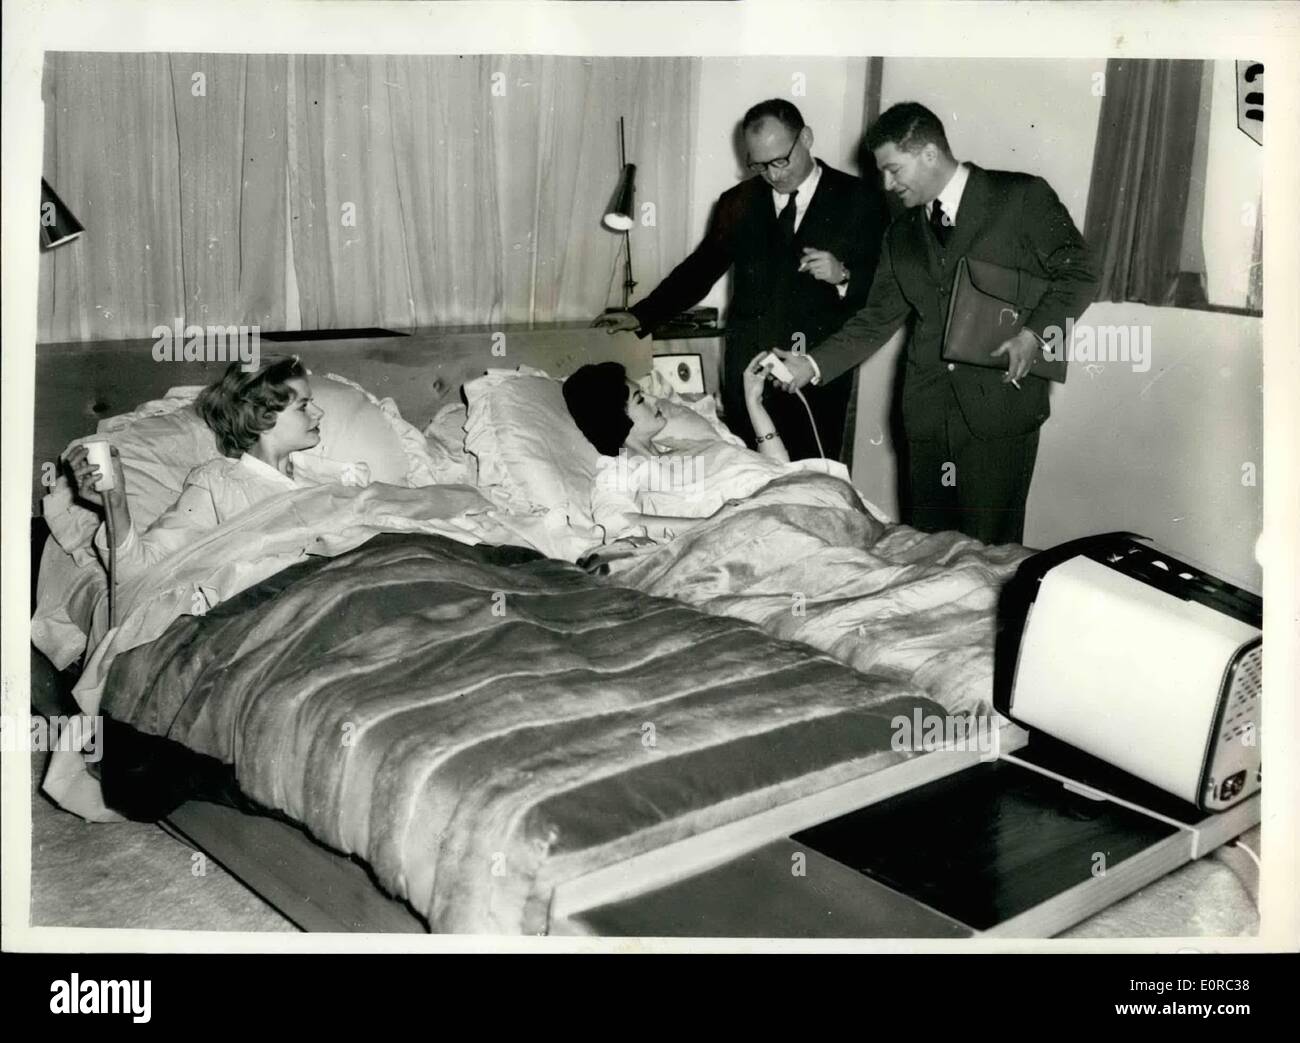 Jan. 01, 1959 - Private View Of Furniture Exhibition. Frenchmen Buys 2500 Bed. ''The Bed'' - Slumberland's 2,500 creation, which is one the major attractions of the furniture exhibition, which opens on January 28th at Earl's Court, was baught today by representatives of galeries barbes, of Pairs, specialists in furniture and tapestries. With it's remote control panels and twin springwall mattresses that are individually adjustable and heated, The Bed heralds a new ''era of the bedroom''. Photo Shows: M. Henri Gross, chairman of galeries barbes, of Pairs, and M.R.D Stock Photo